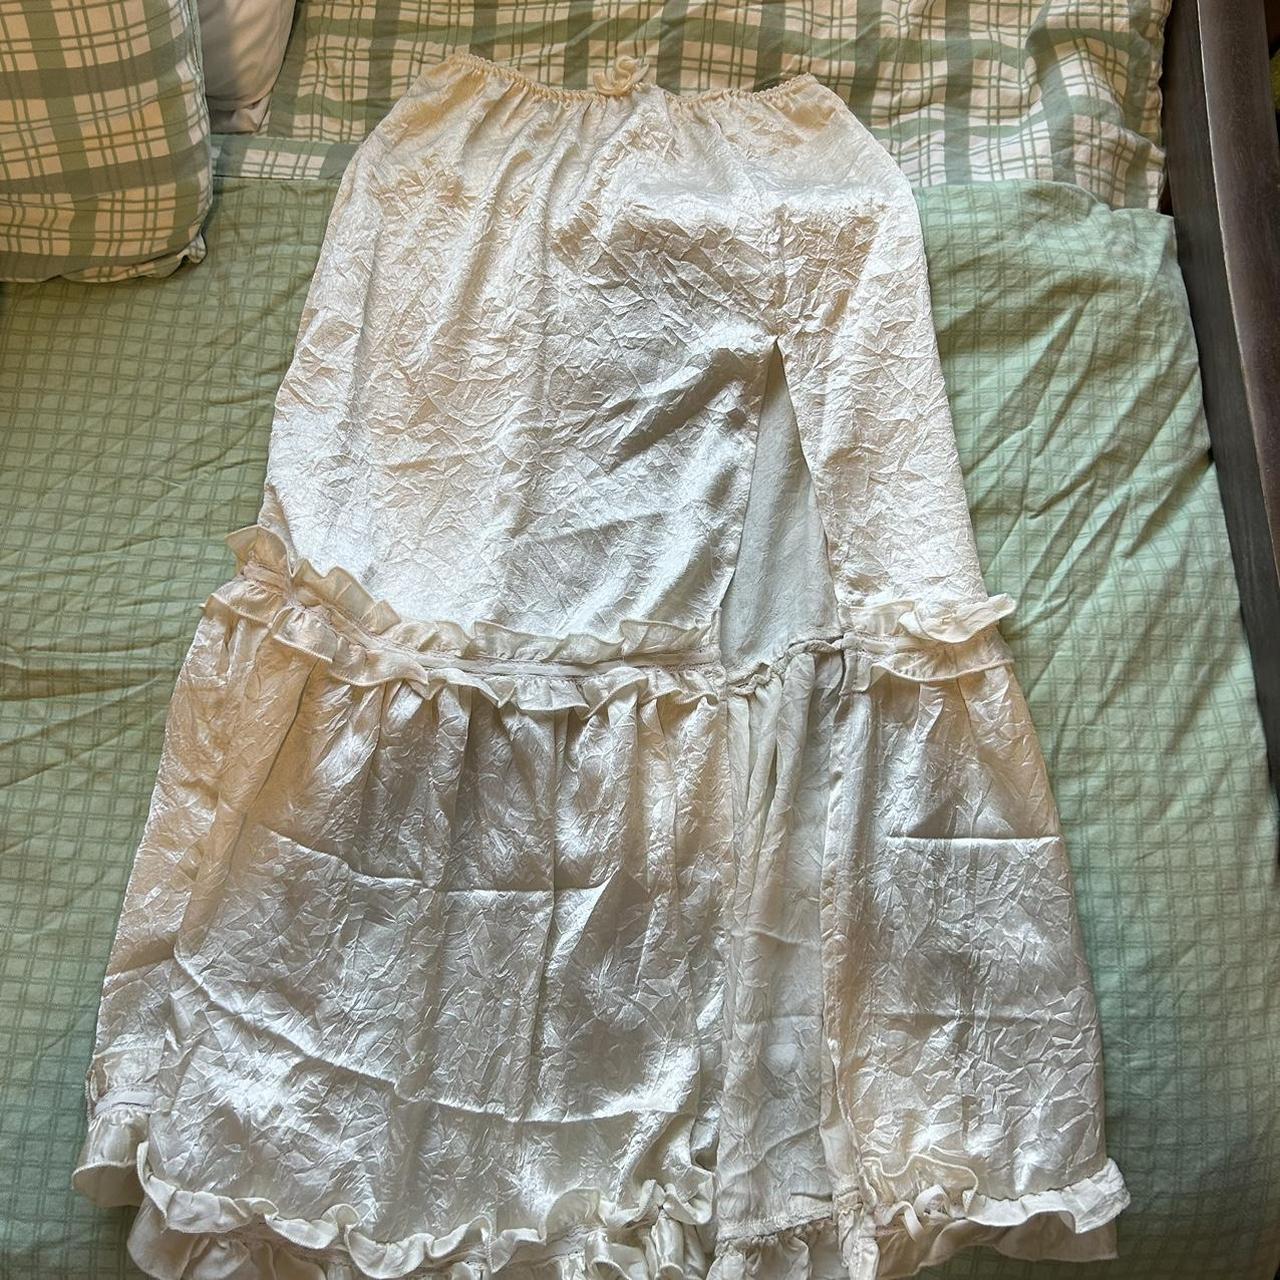 Urban Outfitters Women's Cream and White Skirt | Depop